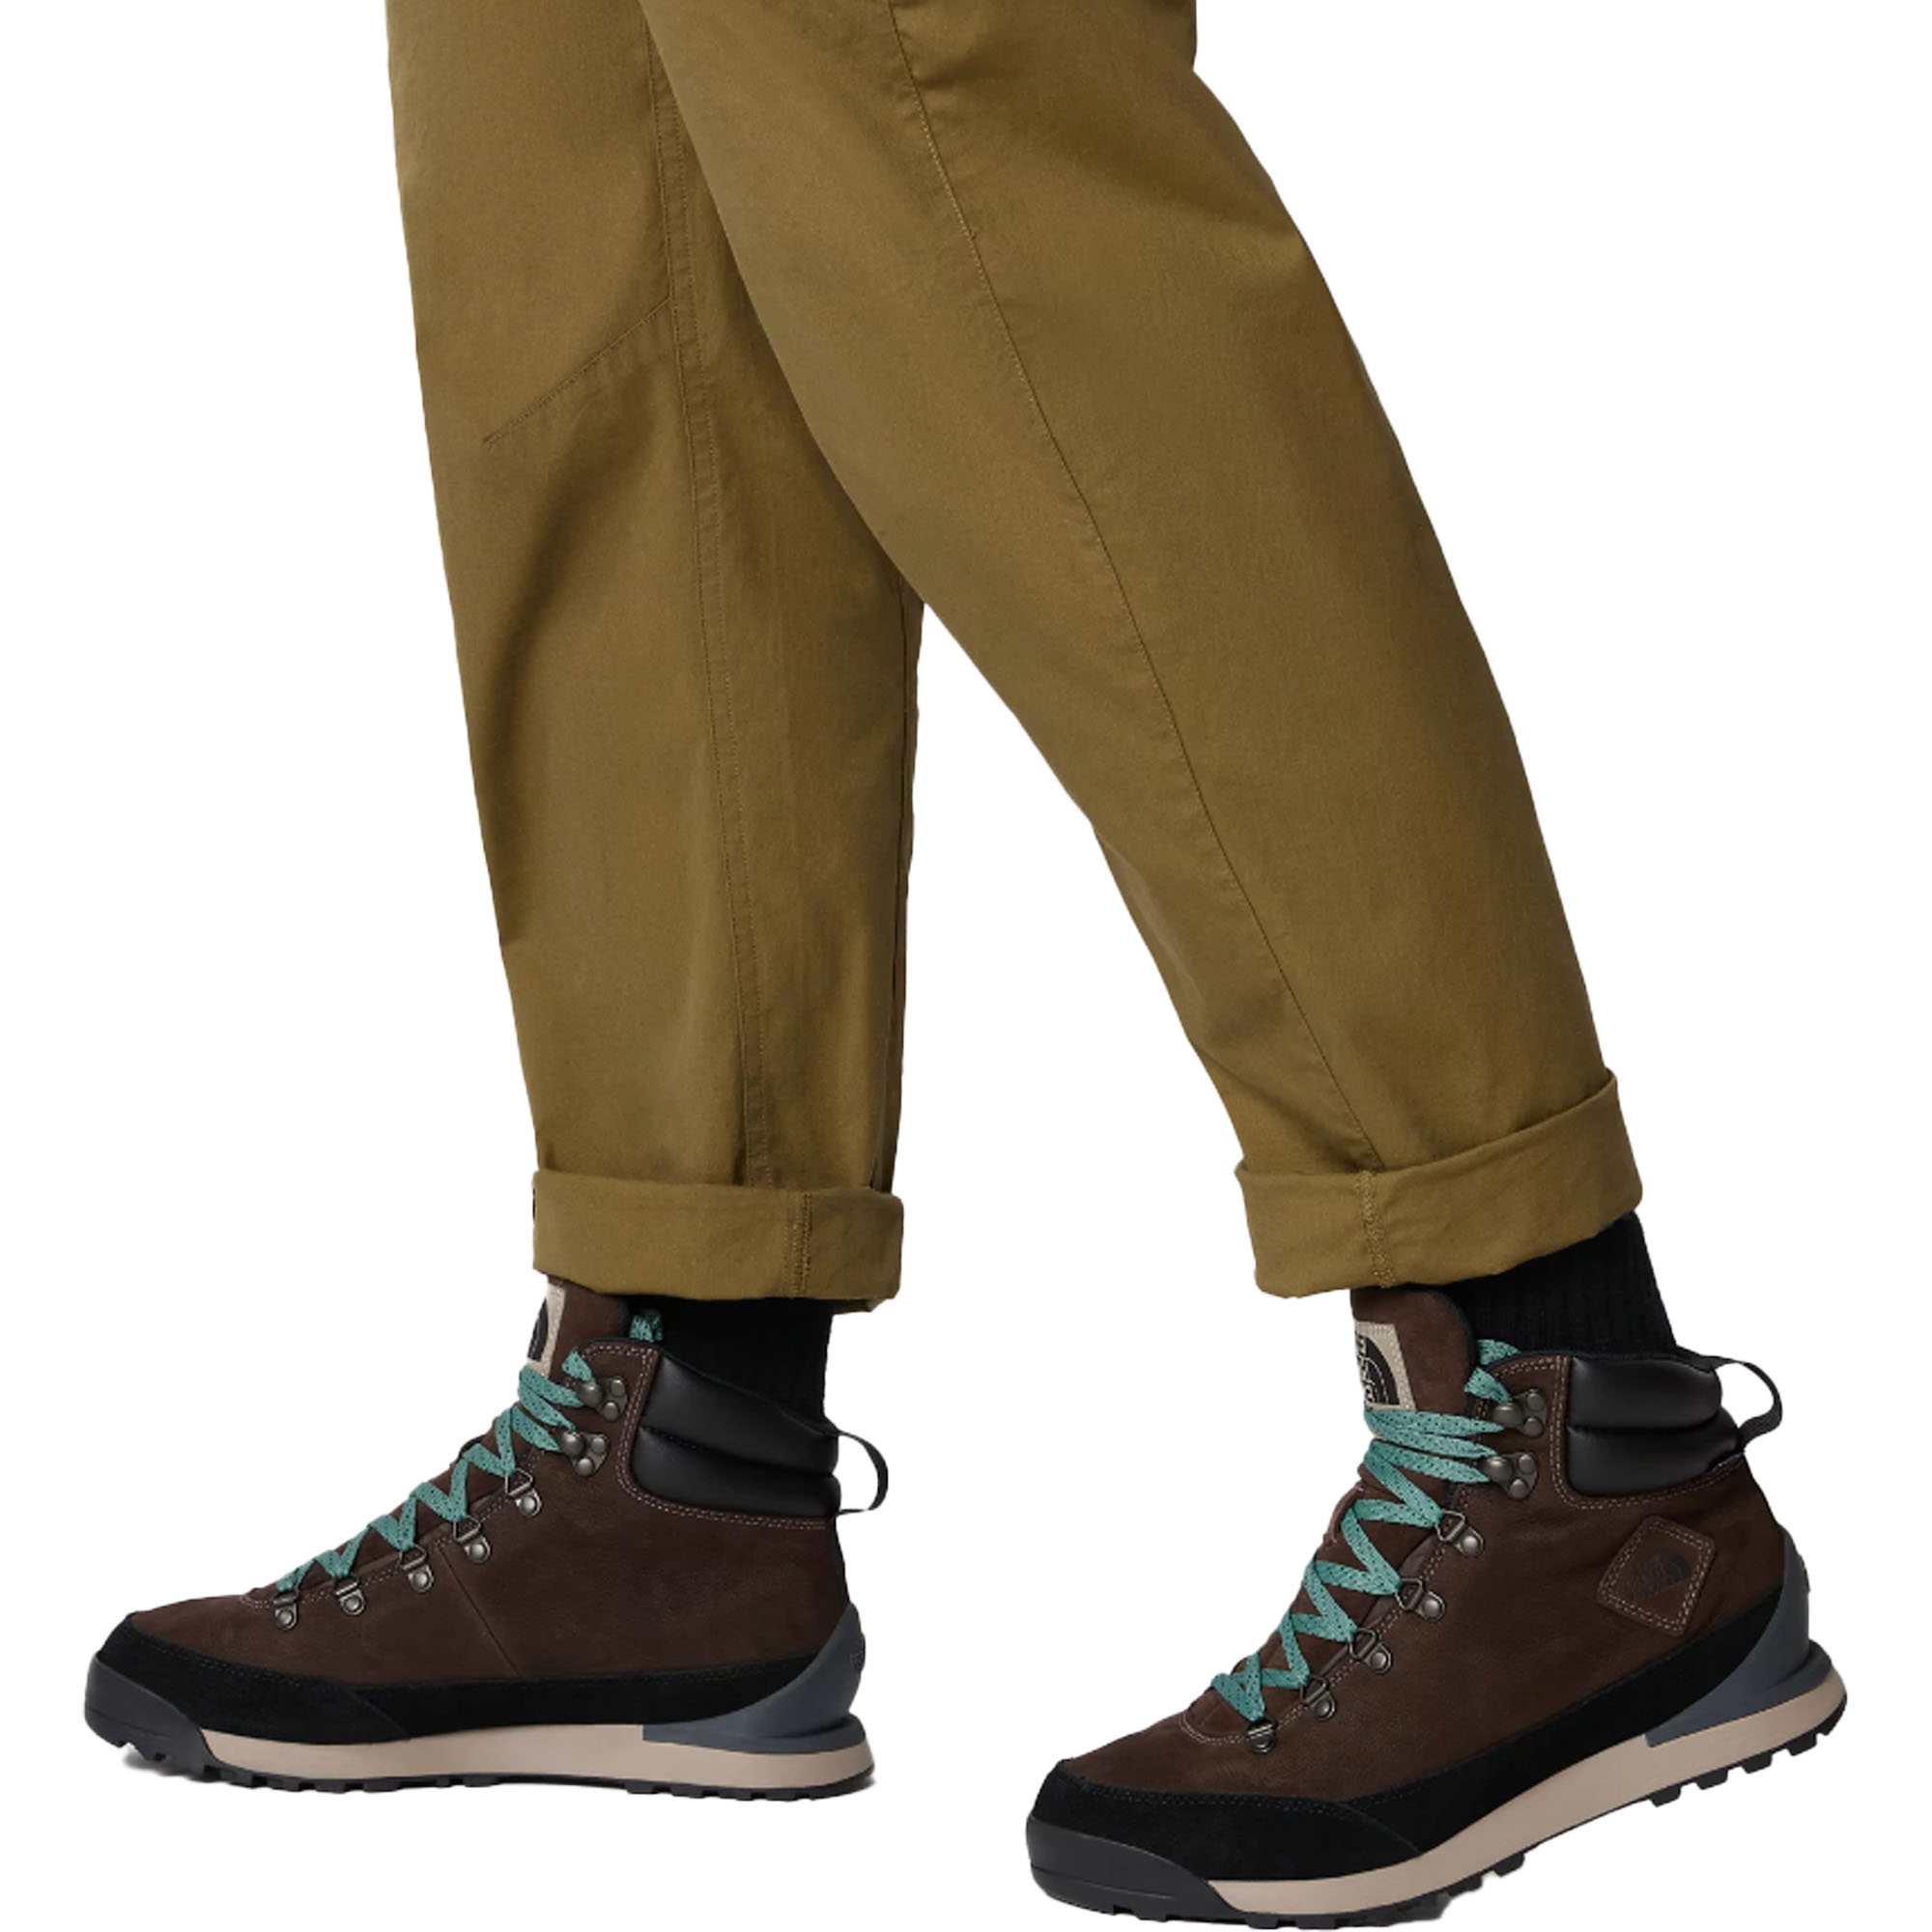 The North Face Back-to-Berkeley IV WP Men's Snow Boots